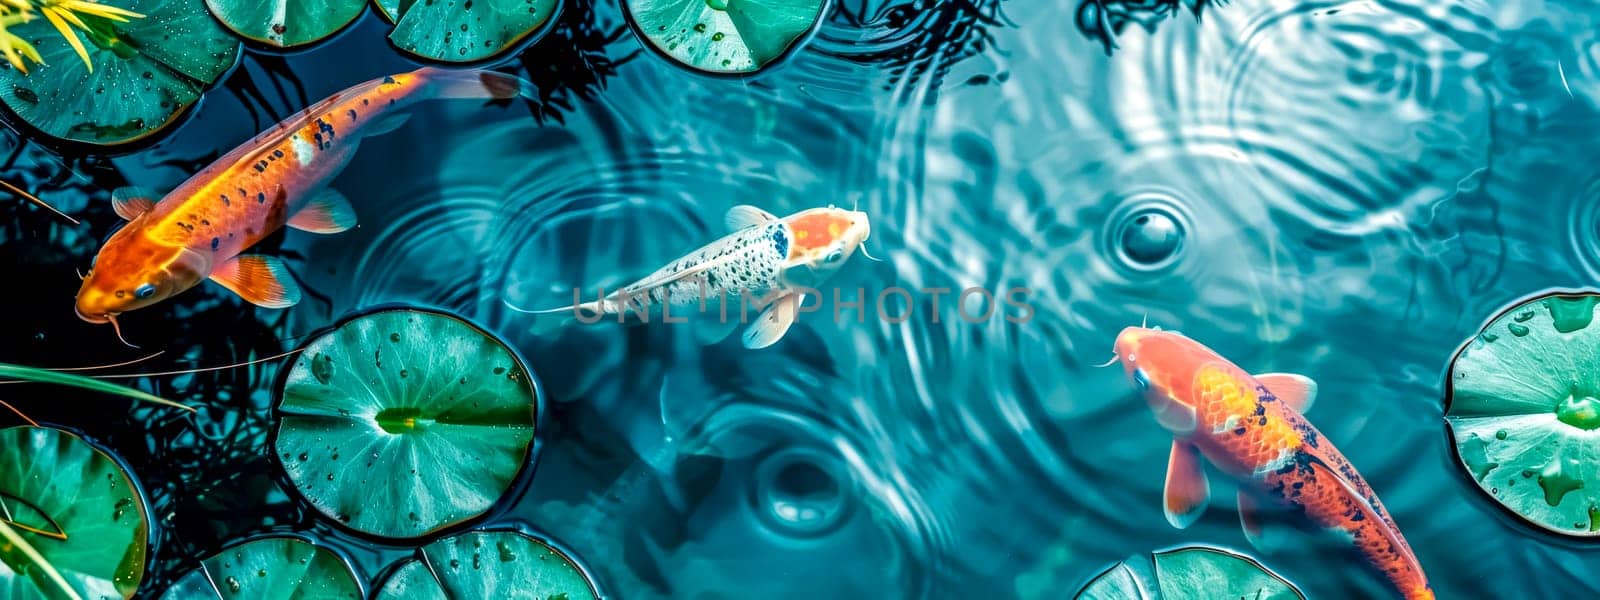 Colorful koi fish swim gracefully among green lily pads in a tranquil pond setting